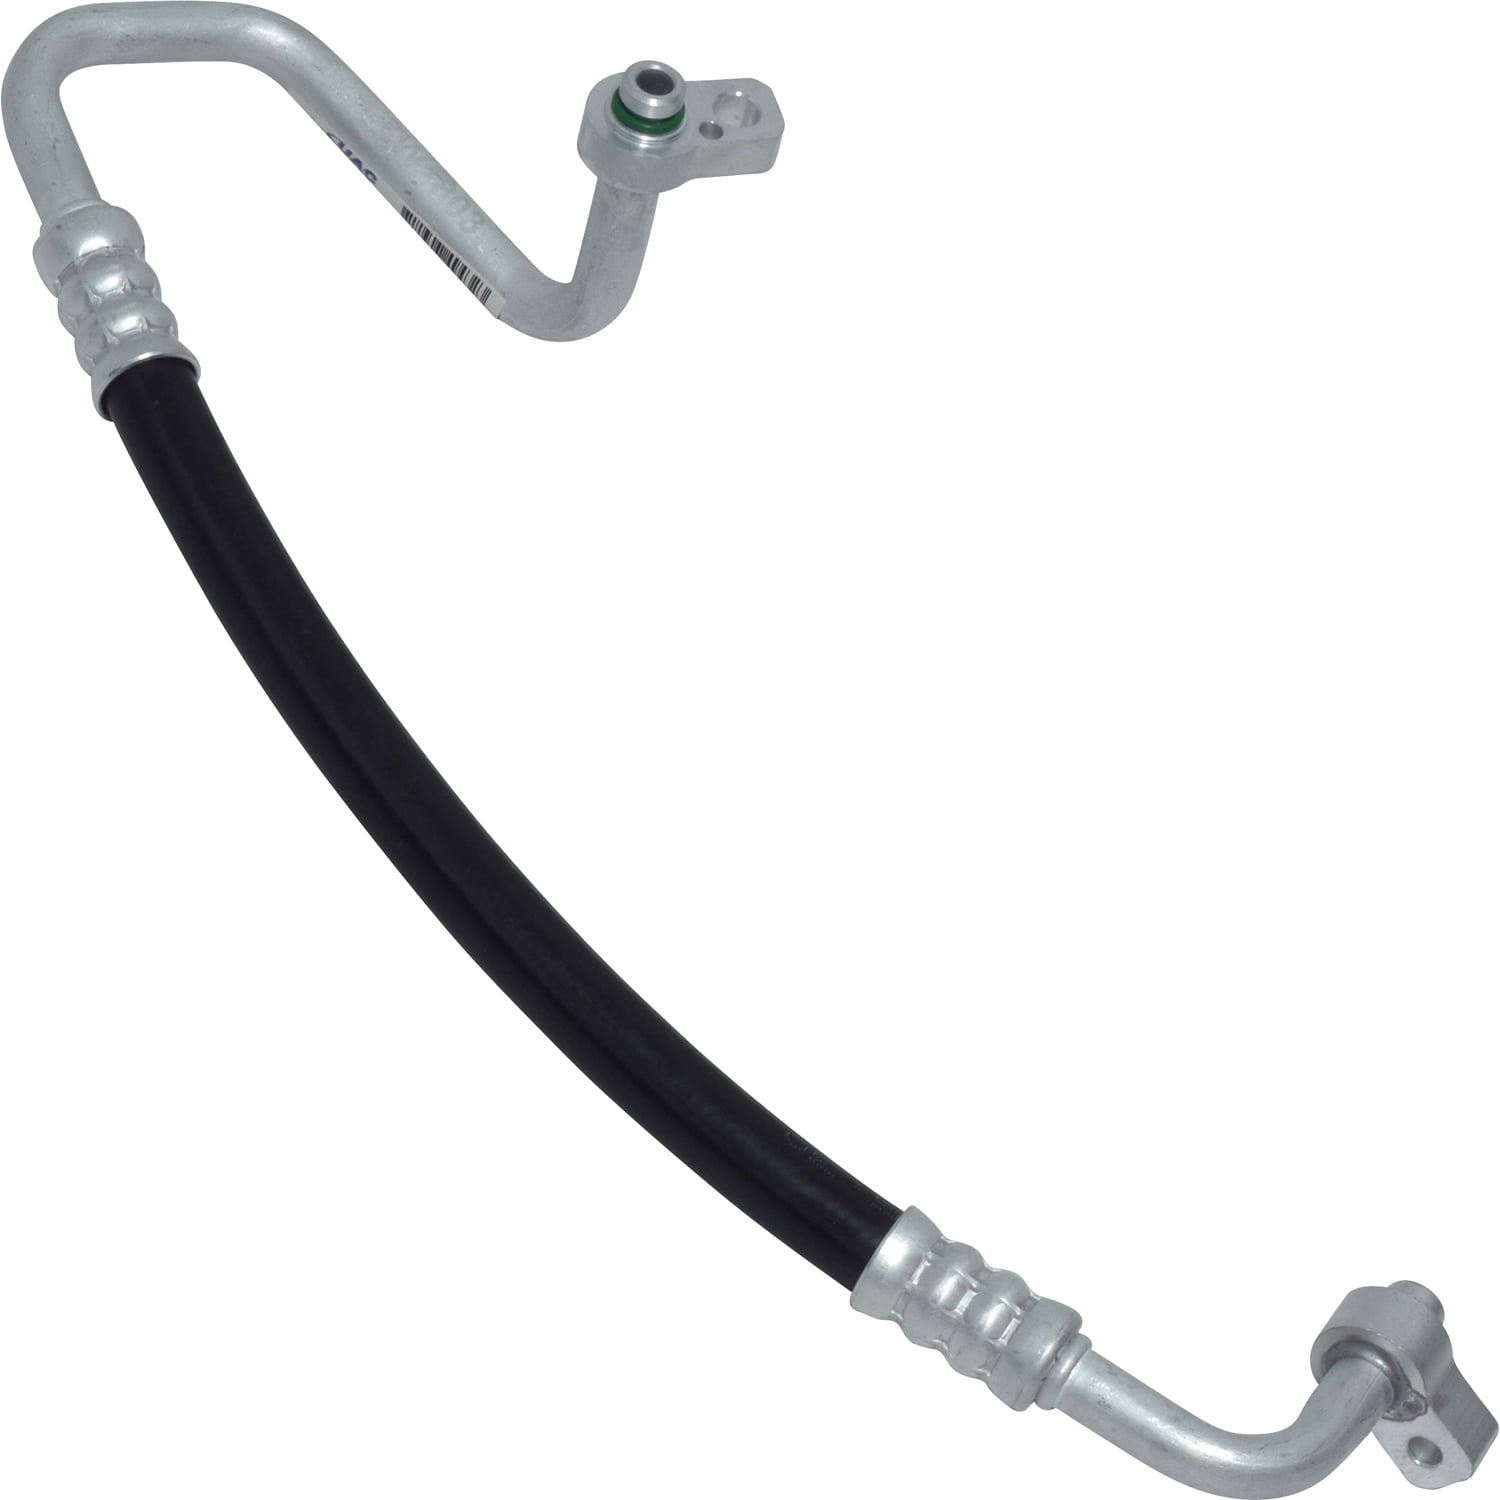 2006 2007 2008 2009 2010 2011 2012 Toyota Yaris L4 New A/C Suction Hose Fits